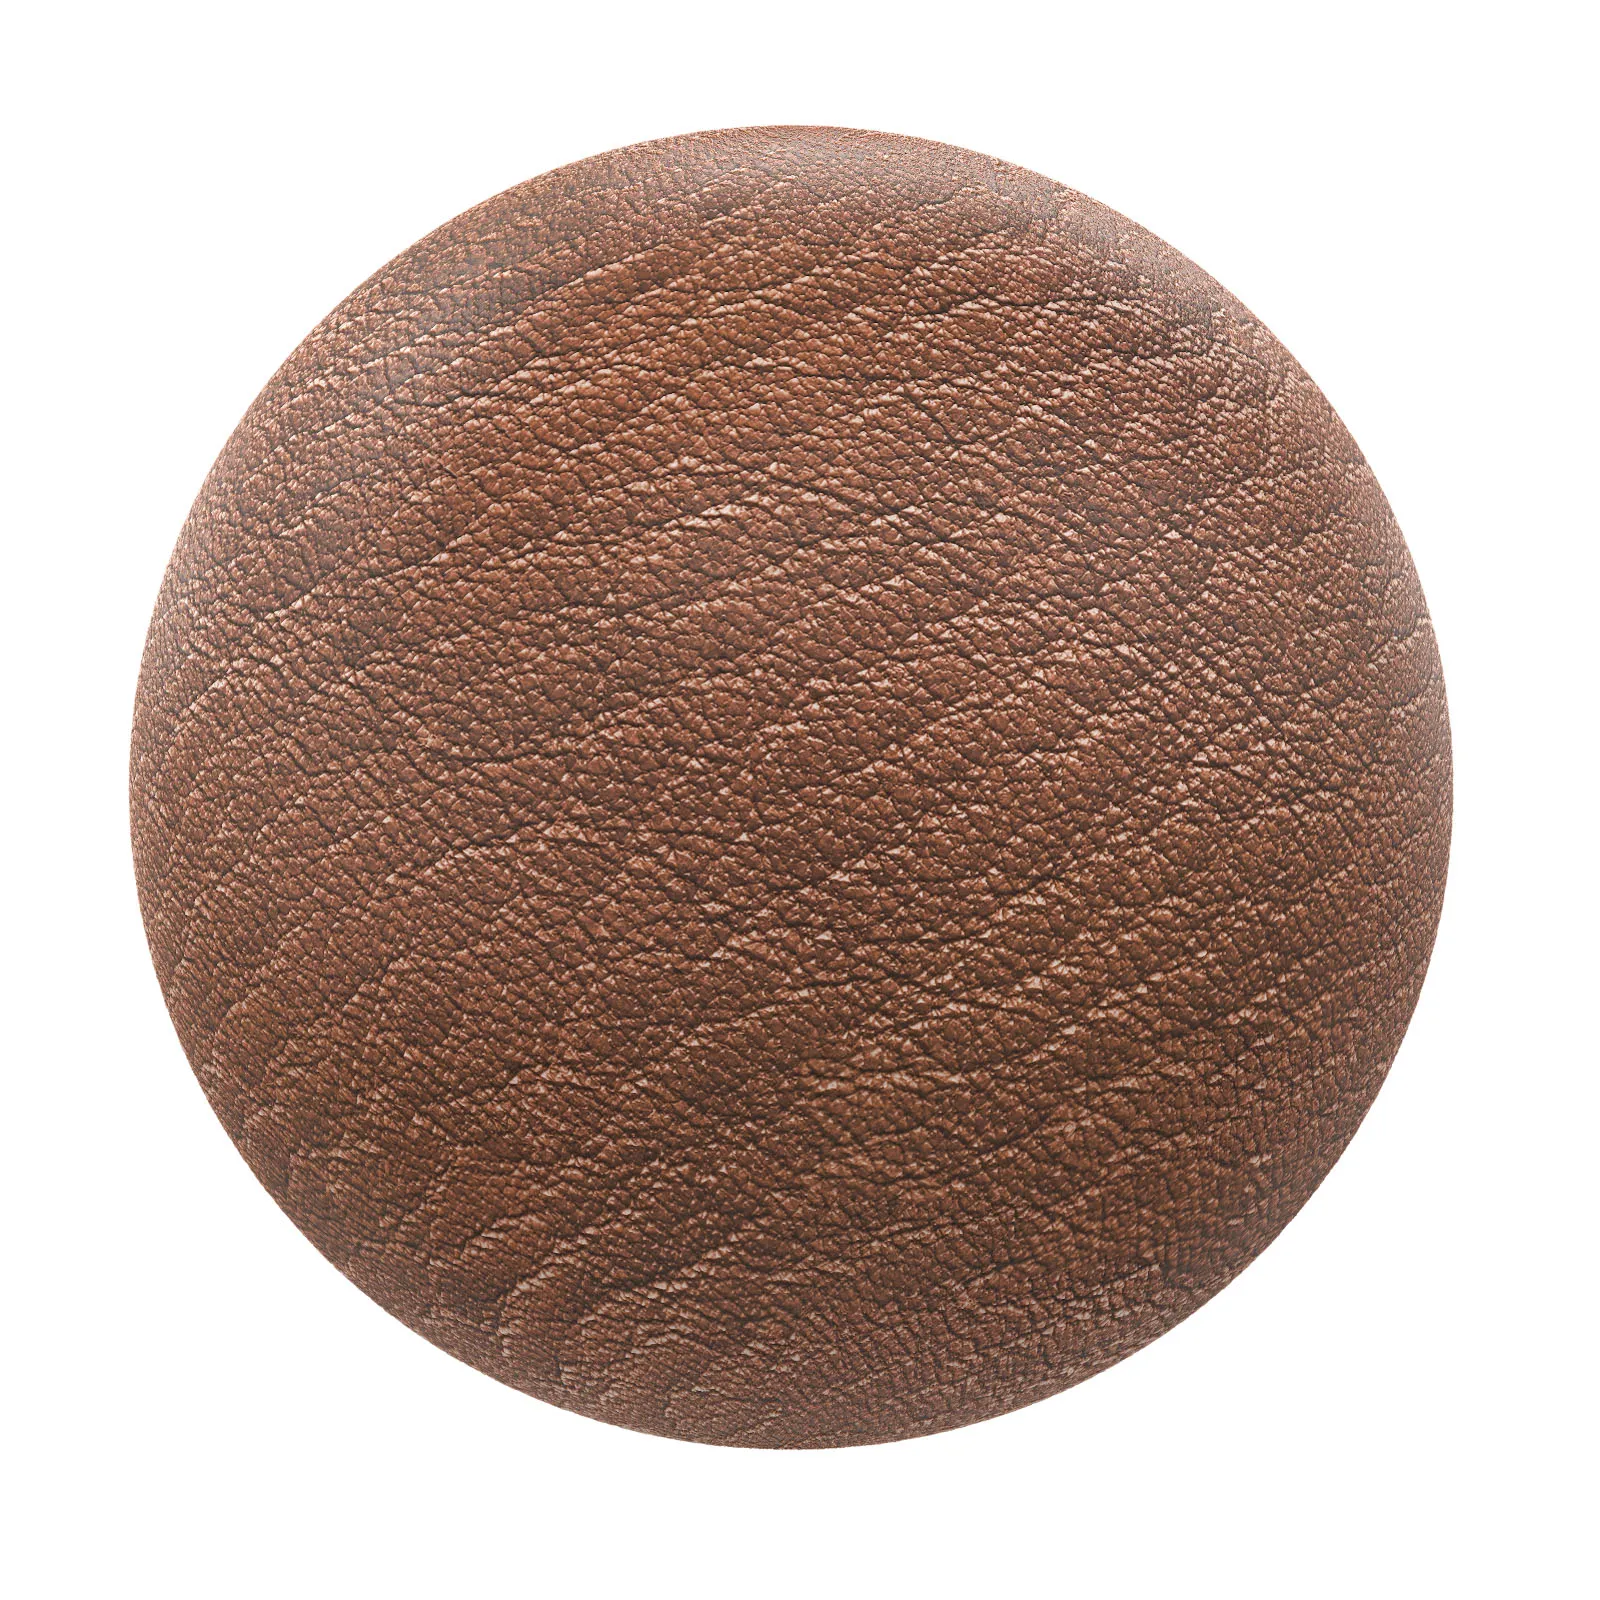 PBR CGAXIS TEXTURES – LEATHER – Brown Leather 7